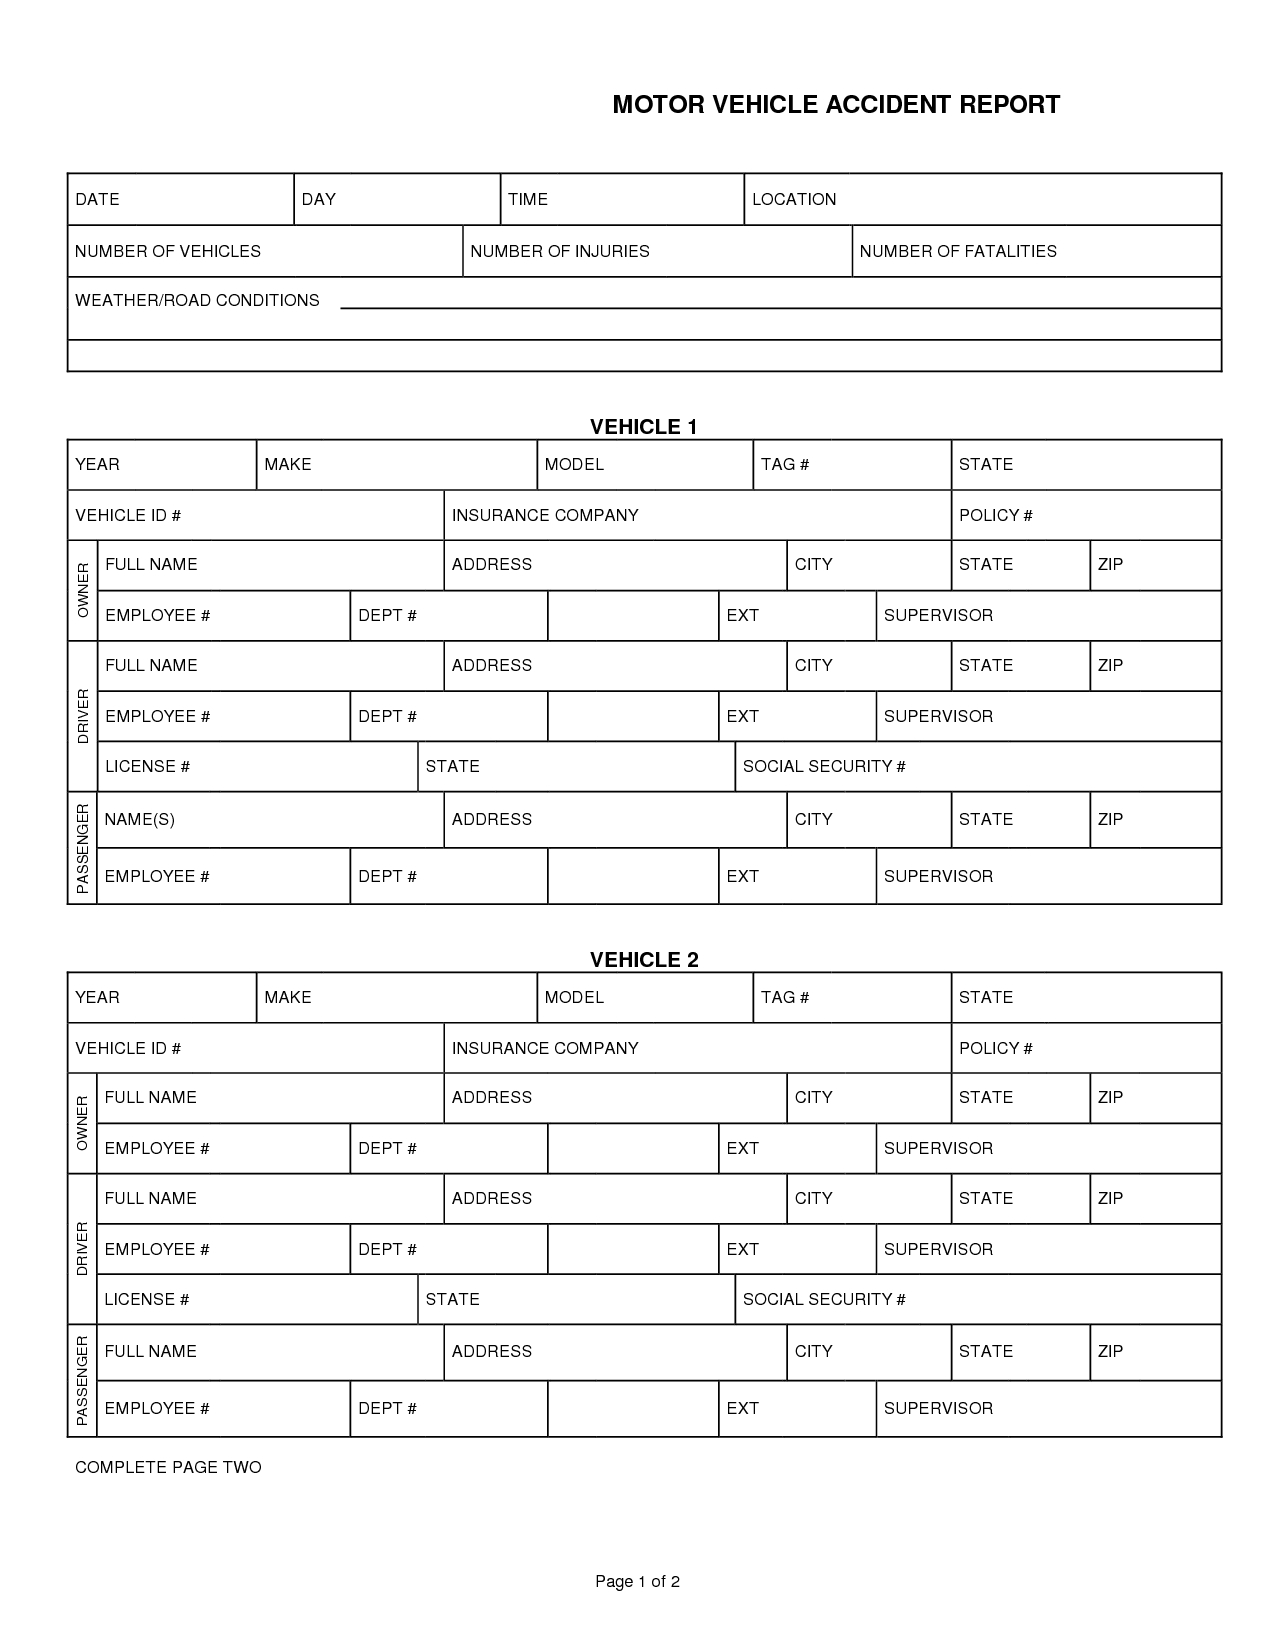 008 Car Accident Report Form Template 290132 Vehicle In Motor Vehicle Accident Report Form Template